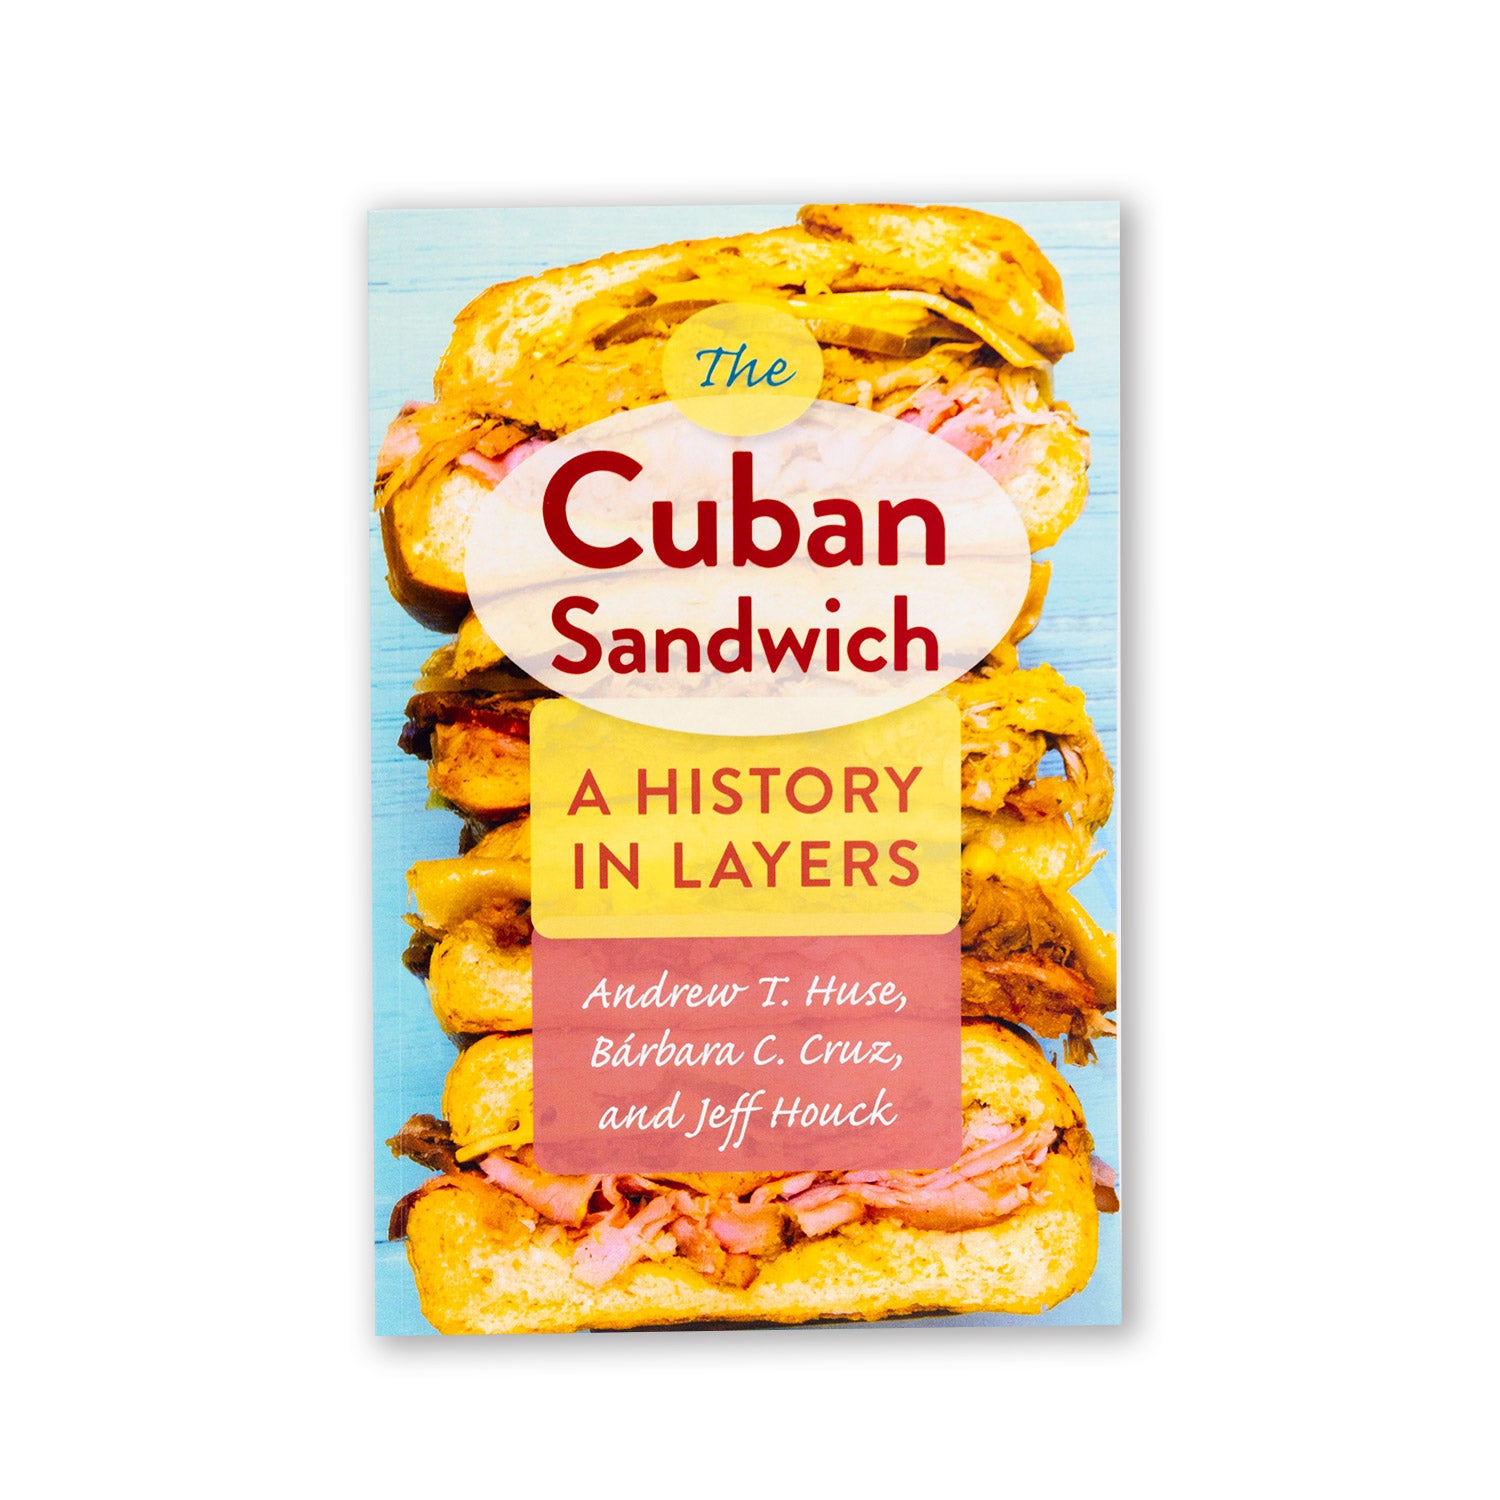 The Cuban Sandwich:  A History in Layers